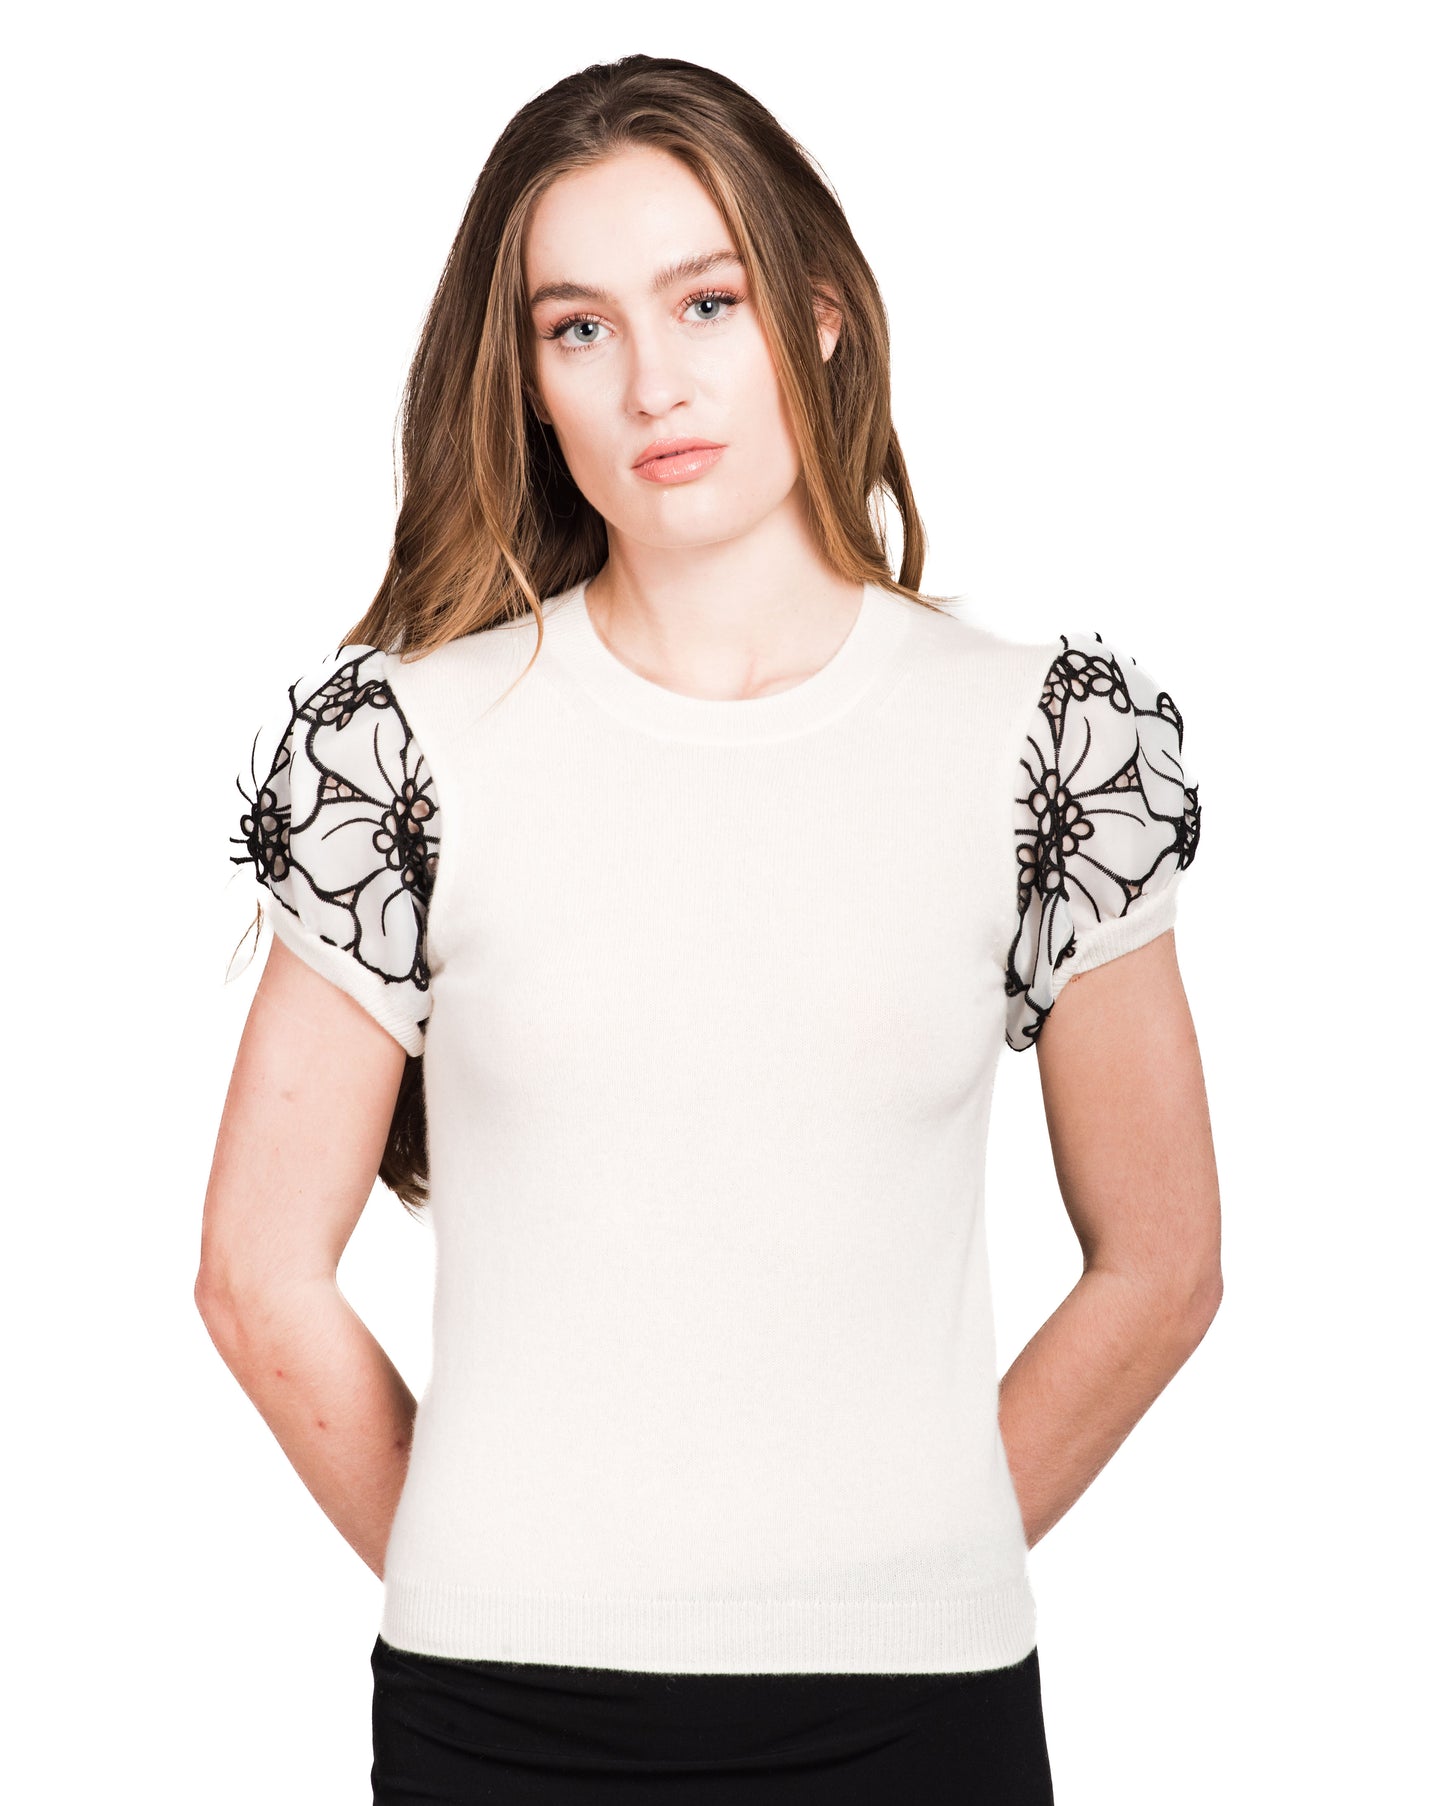 SMALL WHITE CREW NECK CASHMERE SWEATER WITH SHORT PUFF SLEEVES OF  WHITE SILK ORGANZA FLOWERS WITH BLACK OVERSTITCHED TRIM AND PETITE FLORAL CUTOUTS